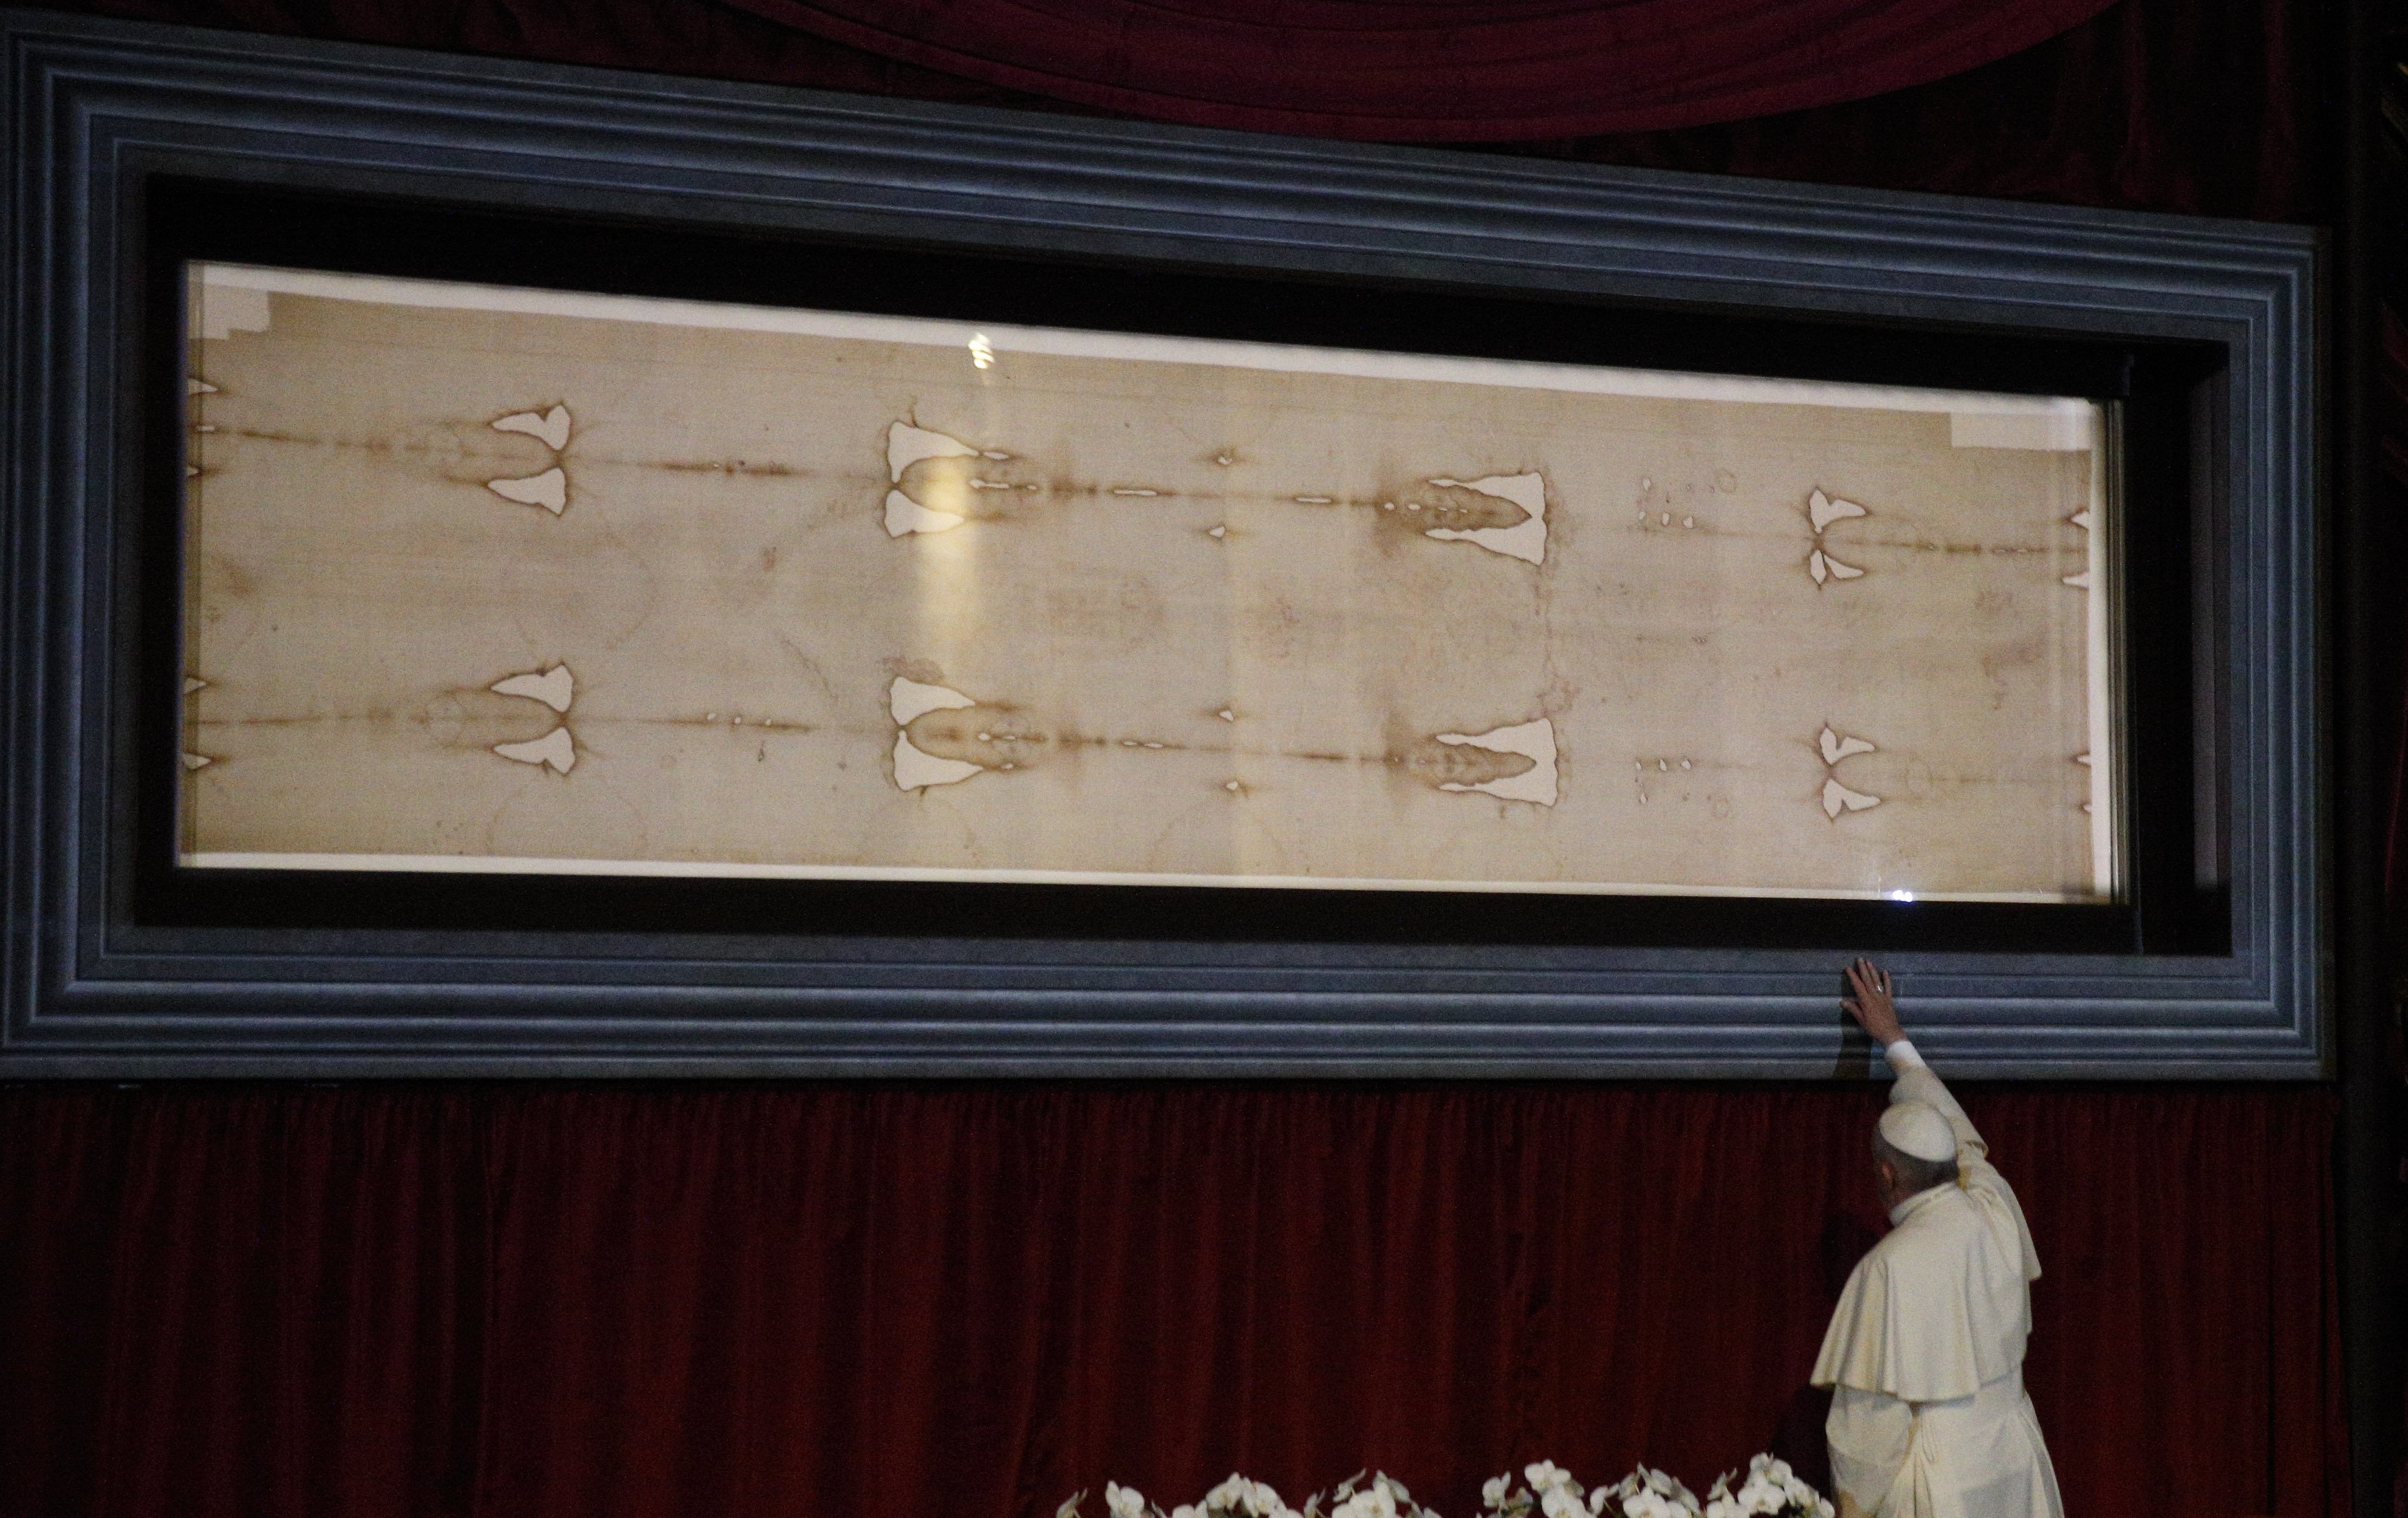 Pope Francis touches the case holding the Shroud of Turin after praying before the cloth in 2015 at the Cathedral of St. John the Baptist in Turin, Italy. (CNS photo/Paul Haring)